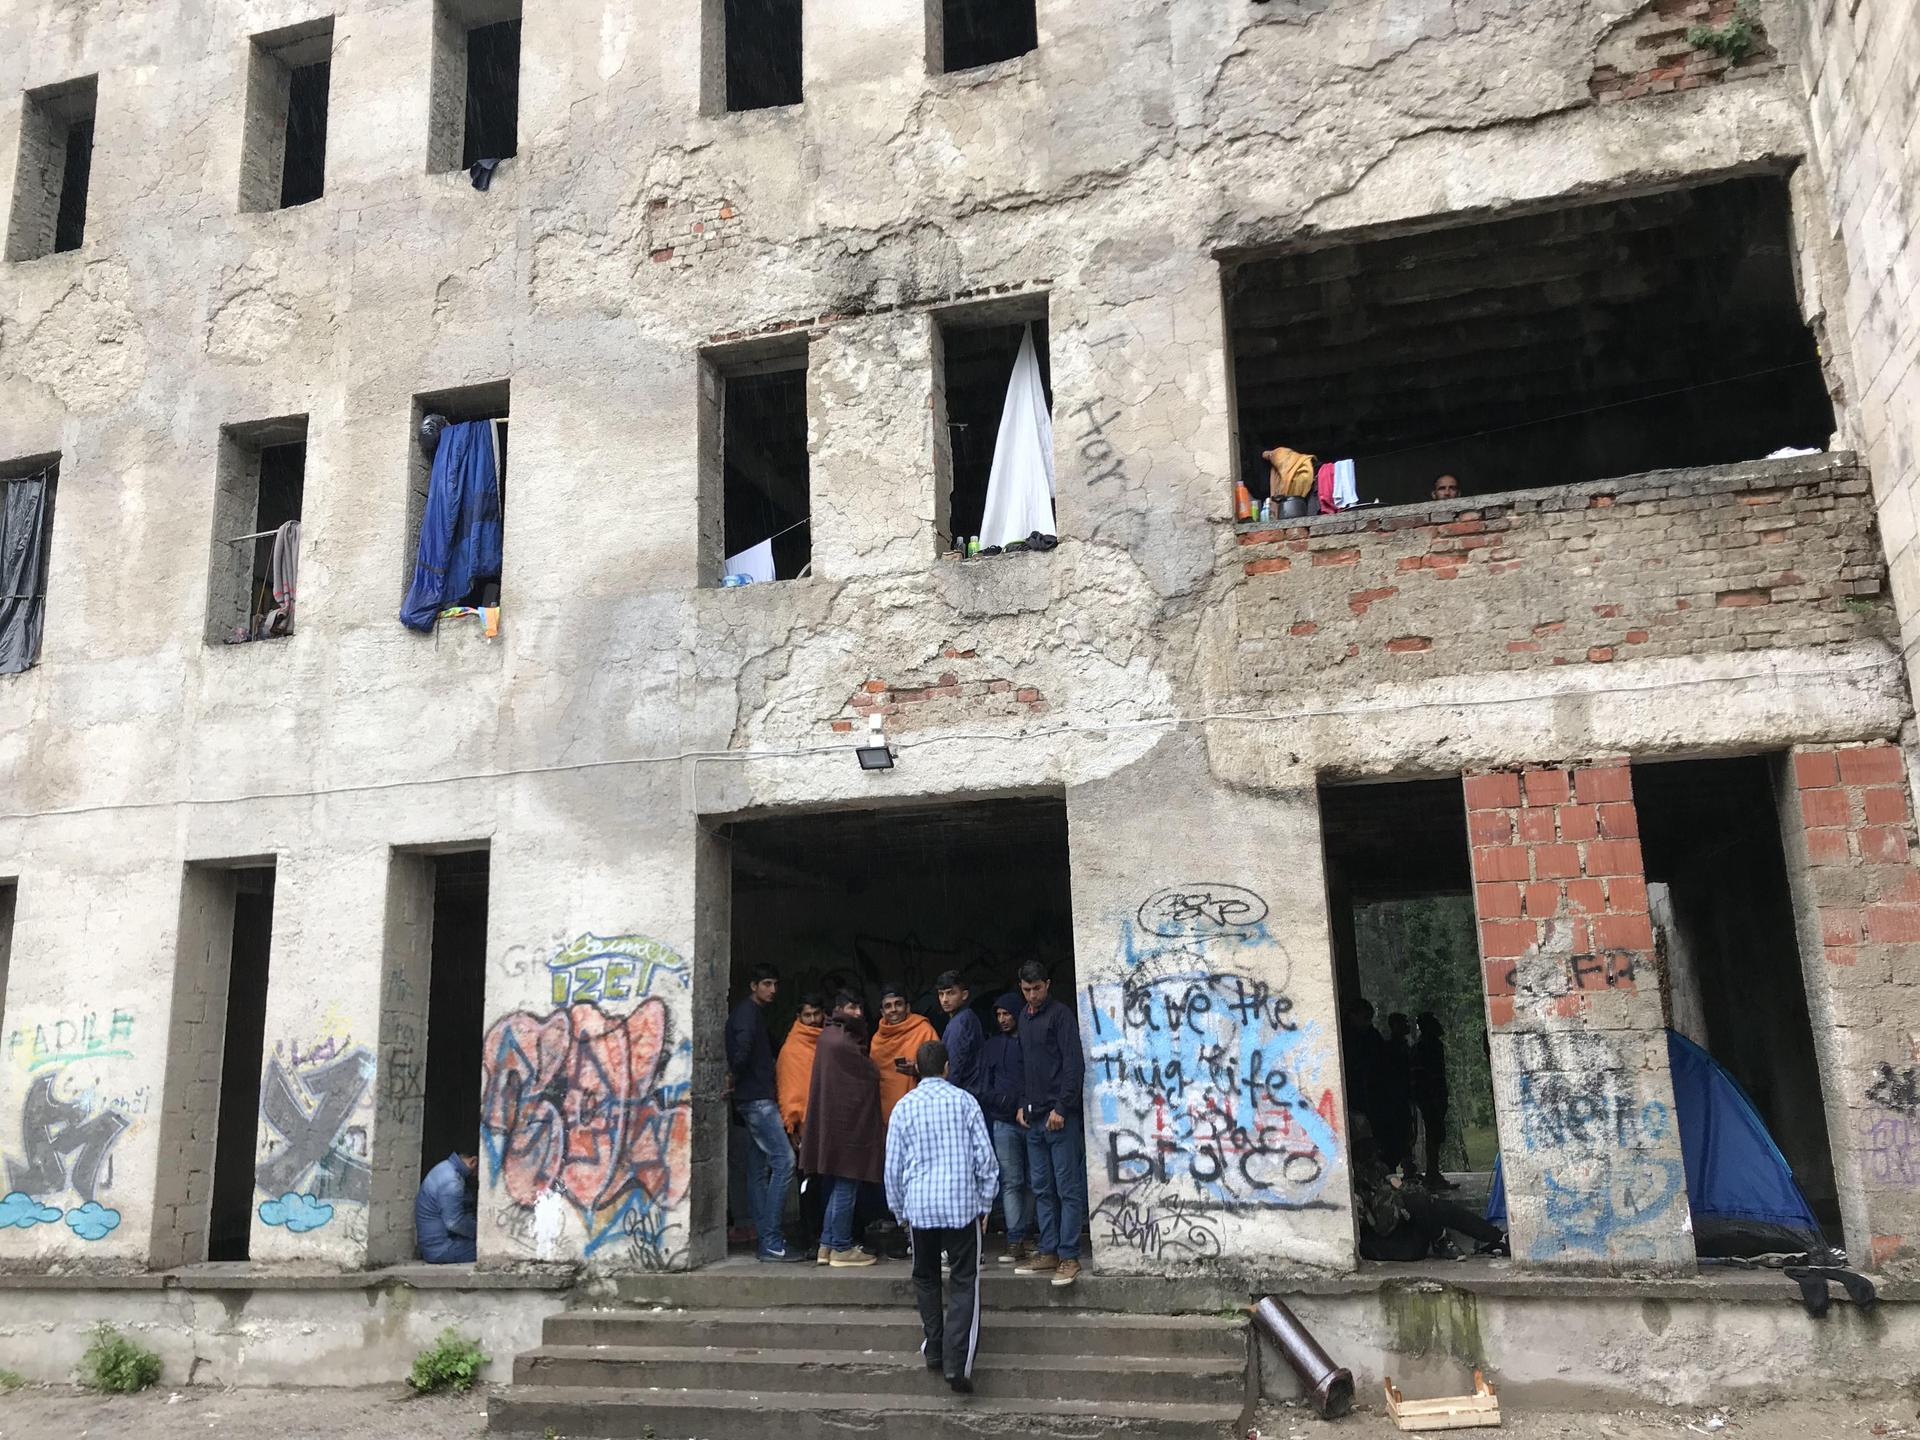 Humanitarian presence at the Bihac dormitory is low and conditions are bleak as migrants wait to cross into Croatia and head on toward Germany.